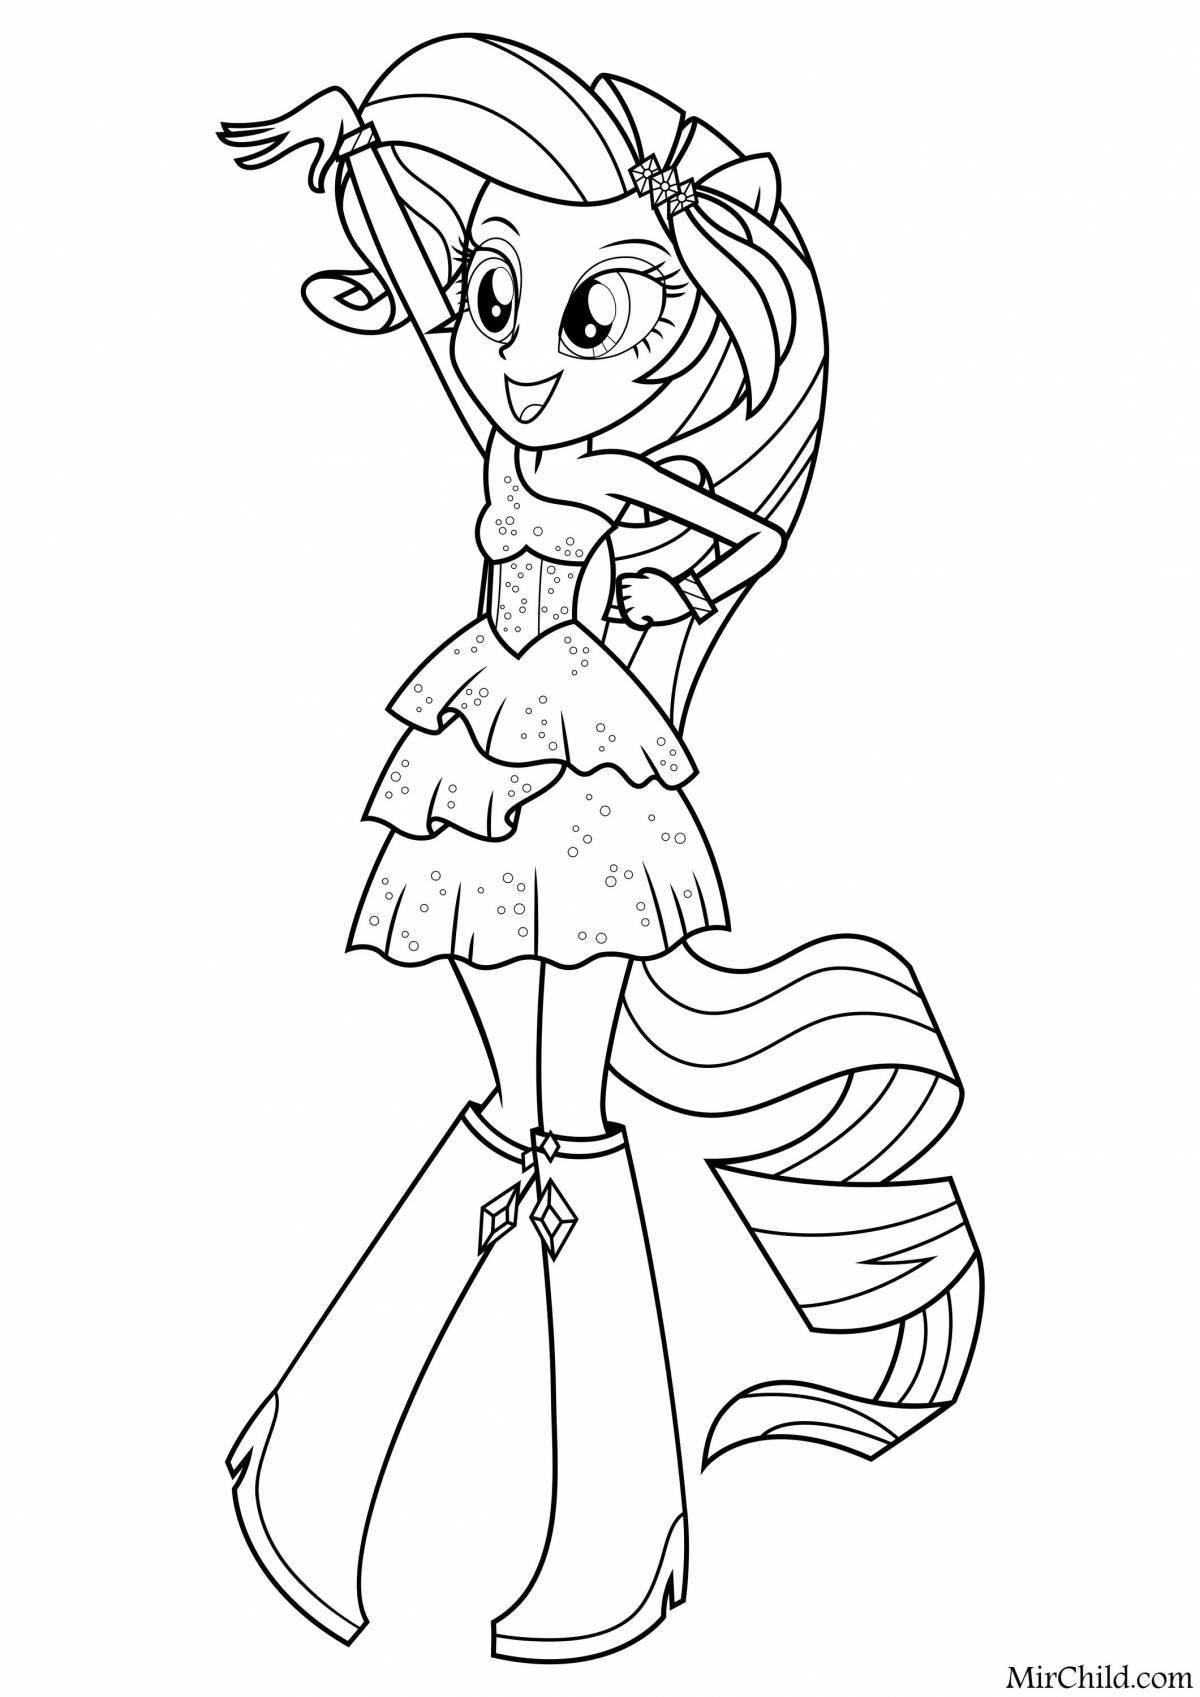 Awesome pony doll coloring page